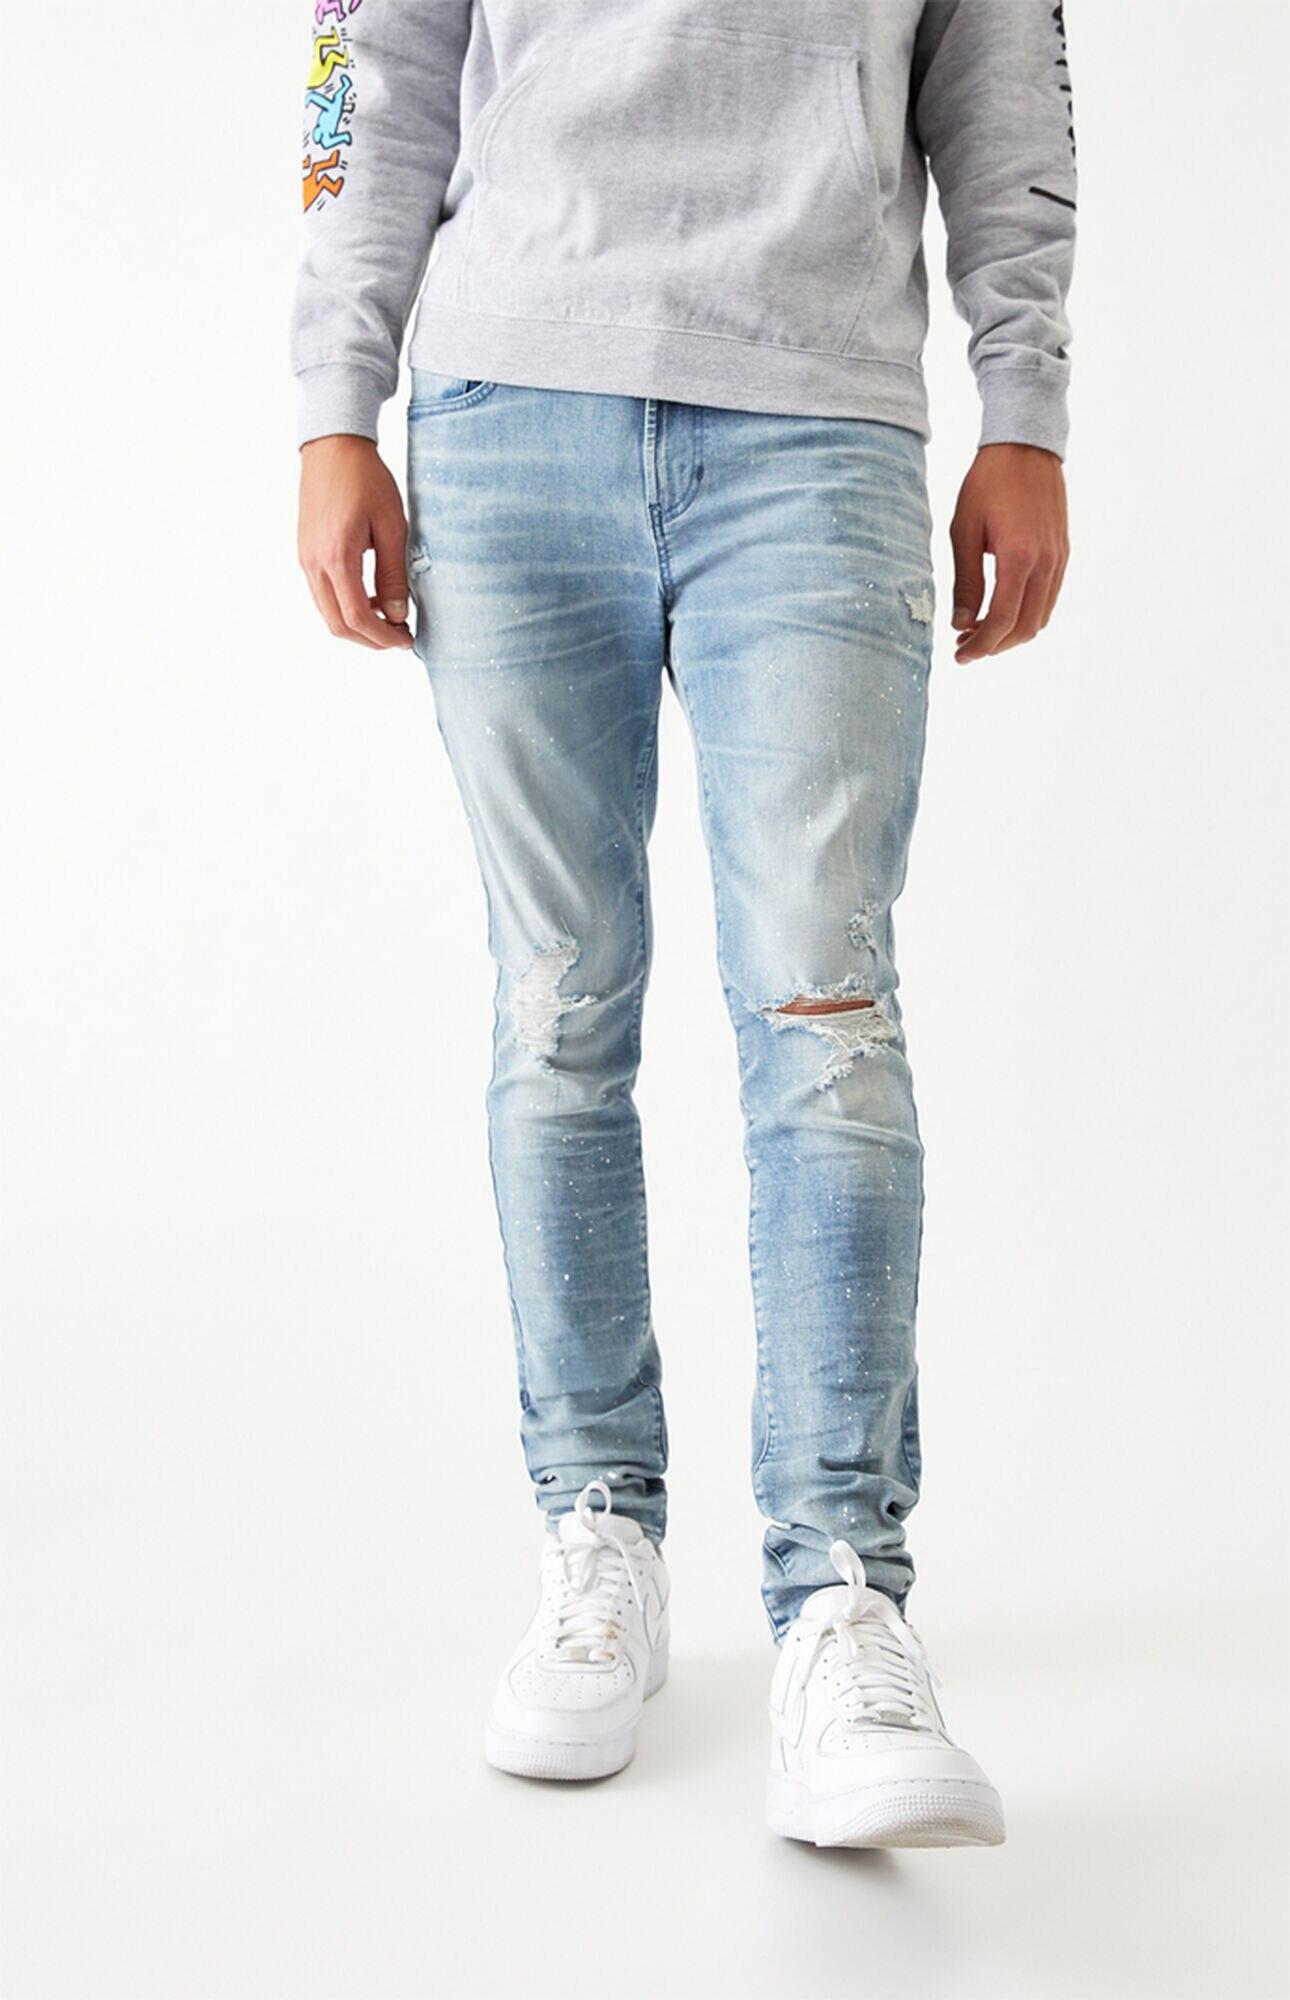 Pacsun Denim Light Ripped Stacked Skinny Jeans In Blue For Men Lyst 